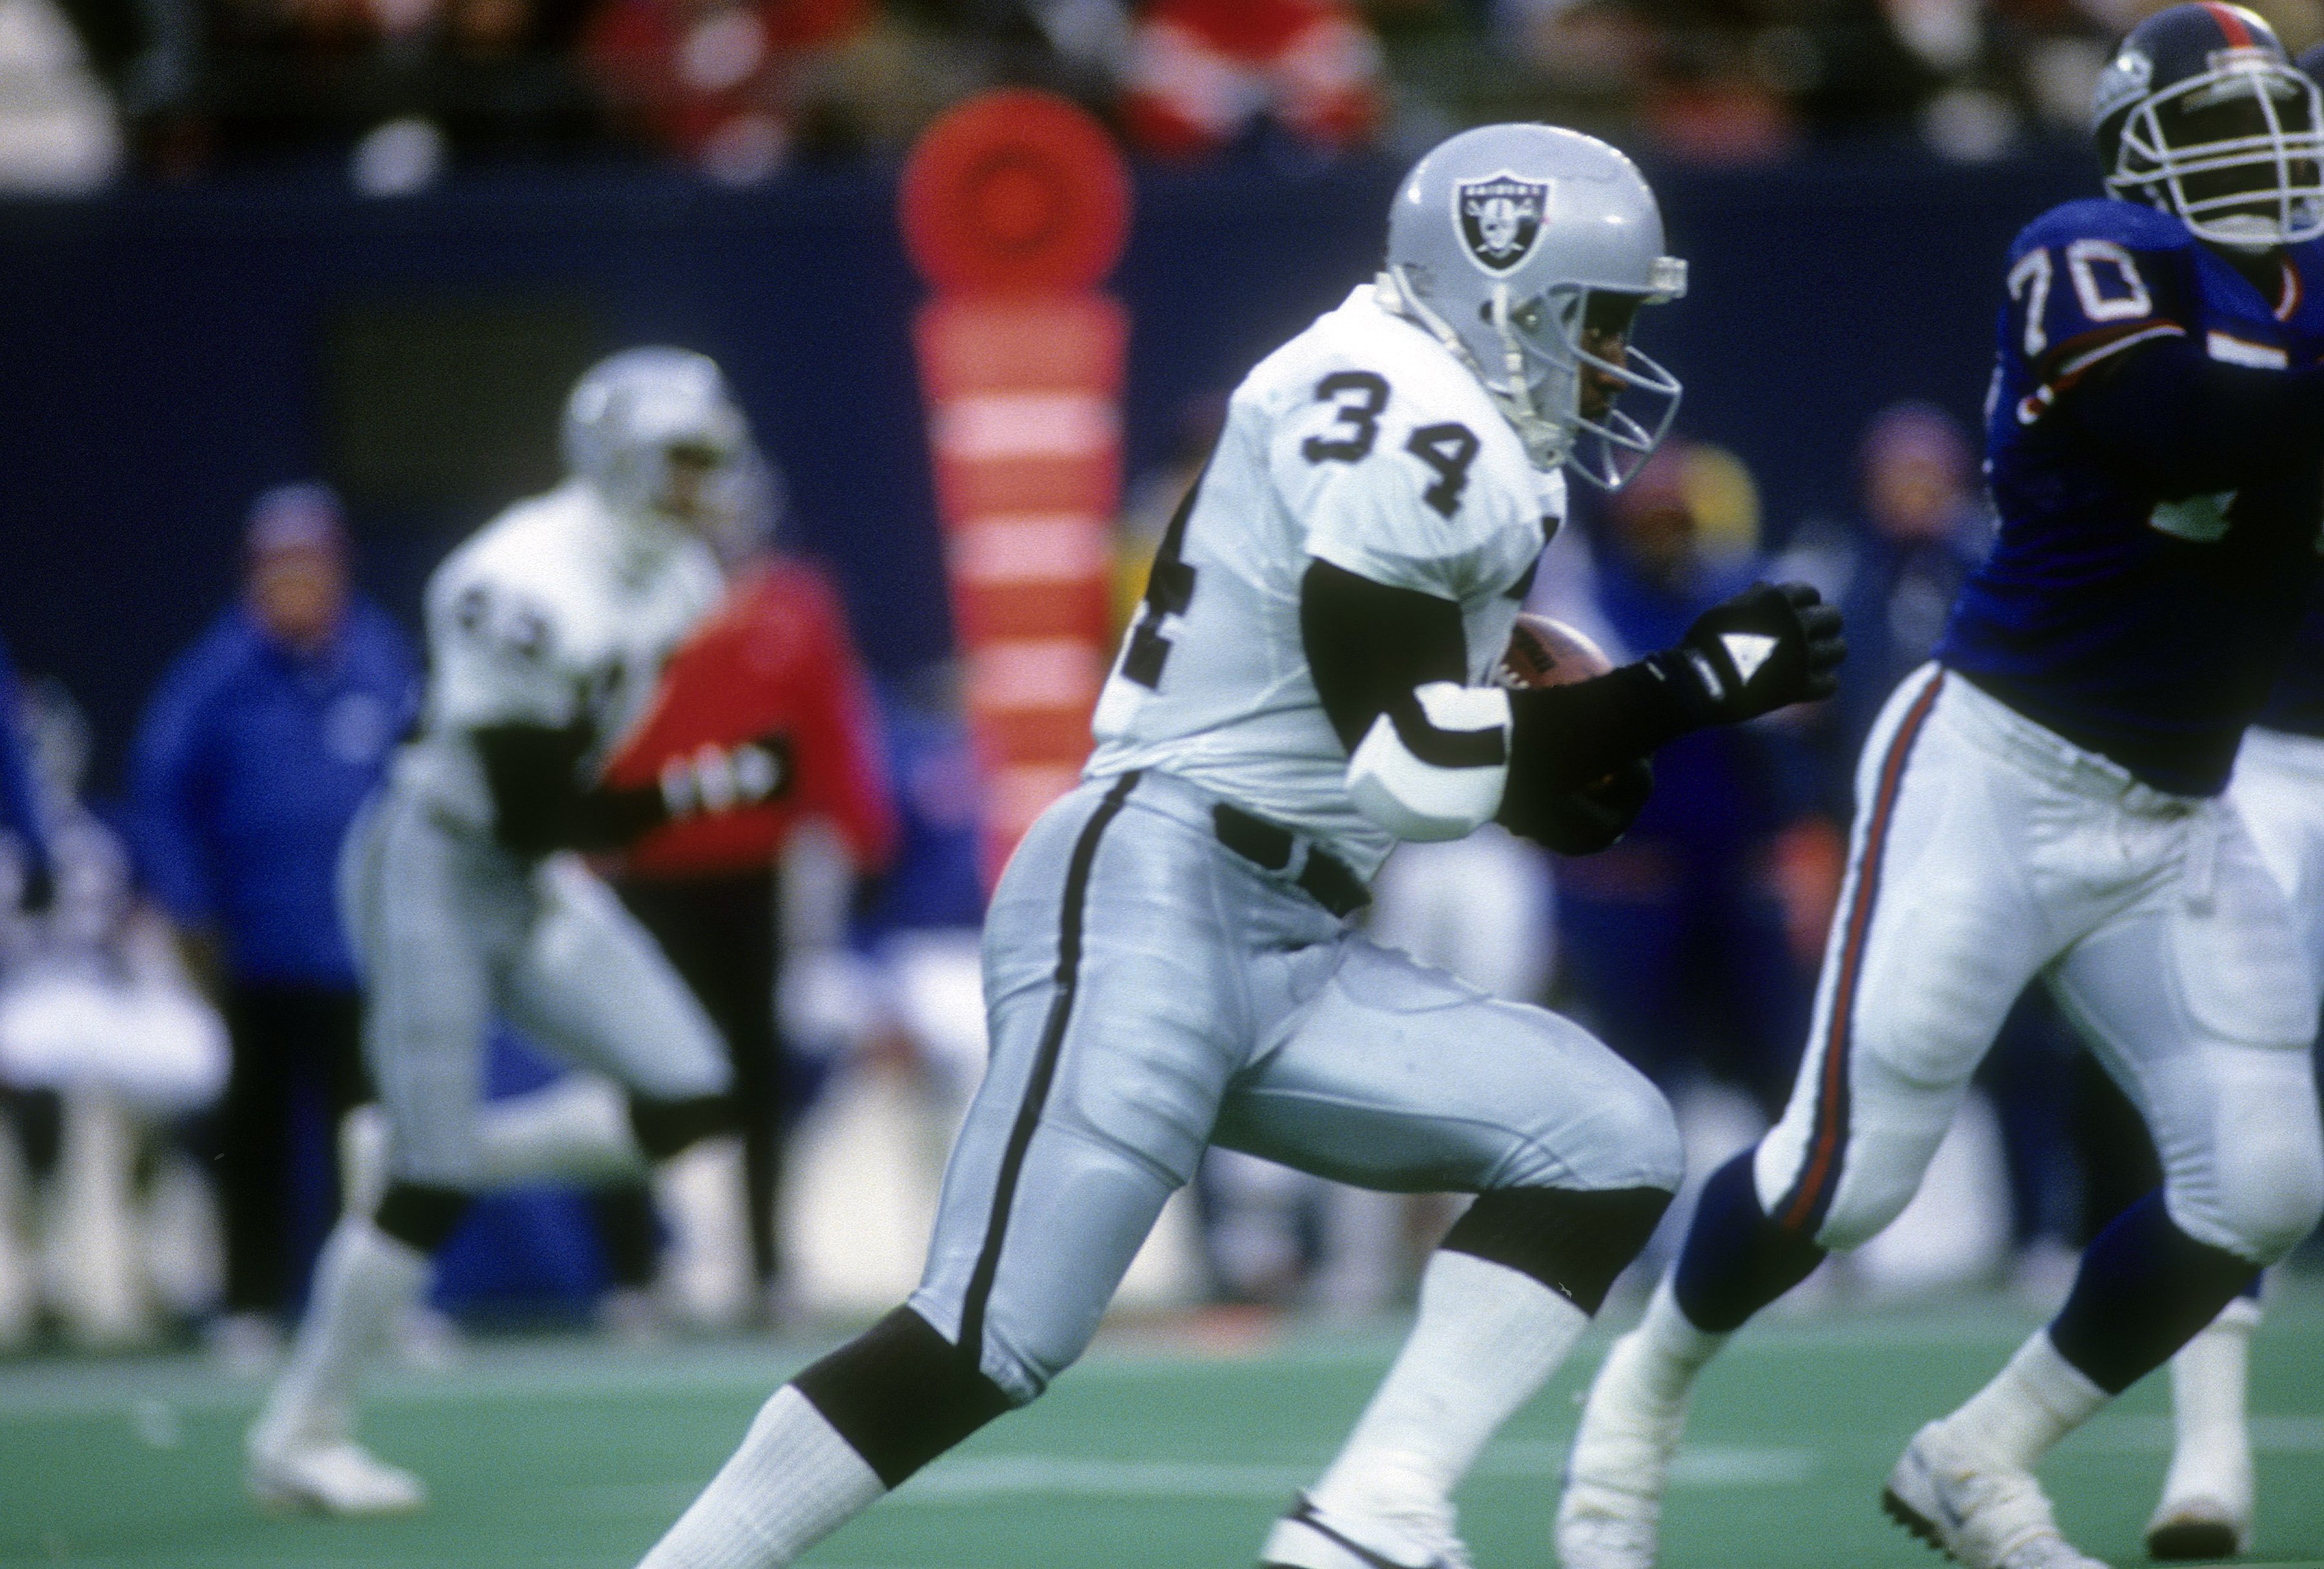 Running back Bo Jackson of the Los Angeles Raiders carries the ball.